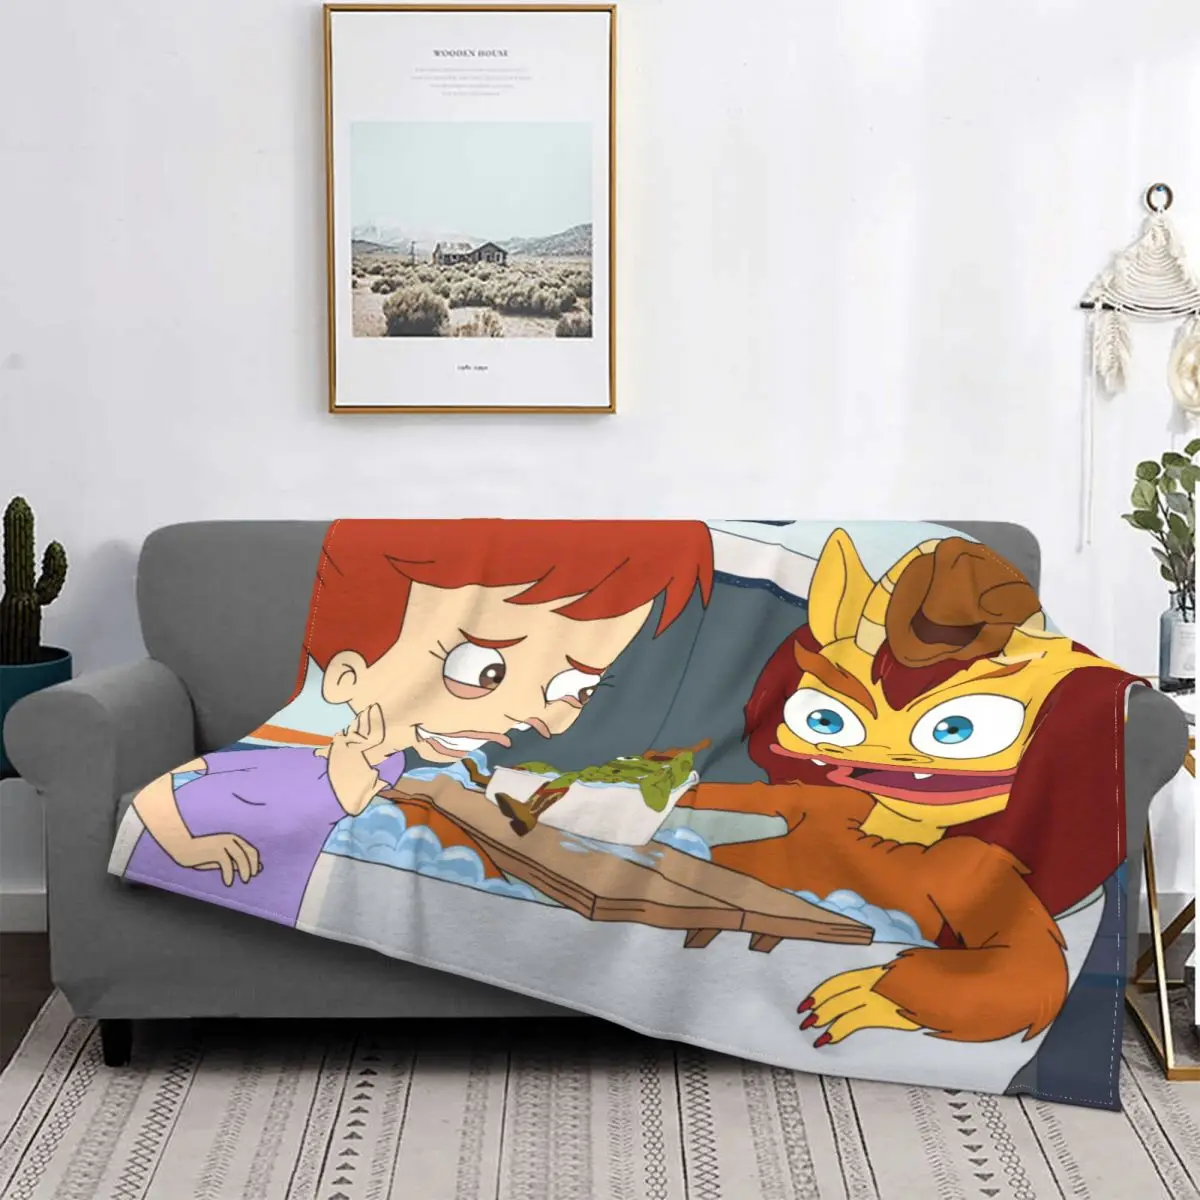 

Big Mouth Steve Adult Animated Blankets Coral Fleece Plush Decoration Bedroom Bedding Couch Bedspread